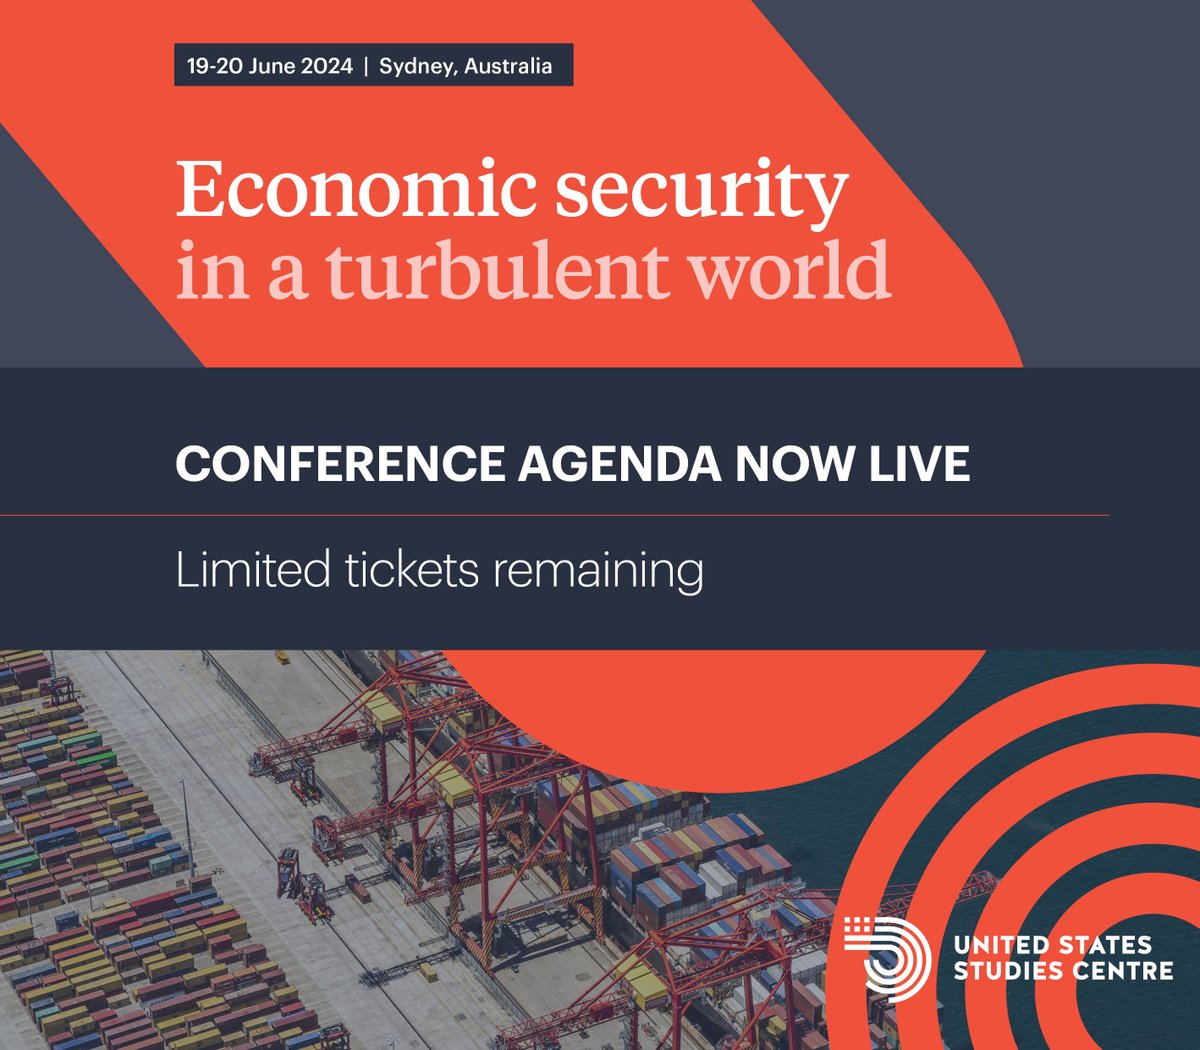 Conference agenda and speakers list now live! With significant senior Australian Government representation & international experts, policymakers and business leaders, you’ll want to be in the room for Economic security in a turbulent world. Click here: ussc.edu.au/economic-secur…